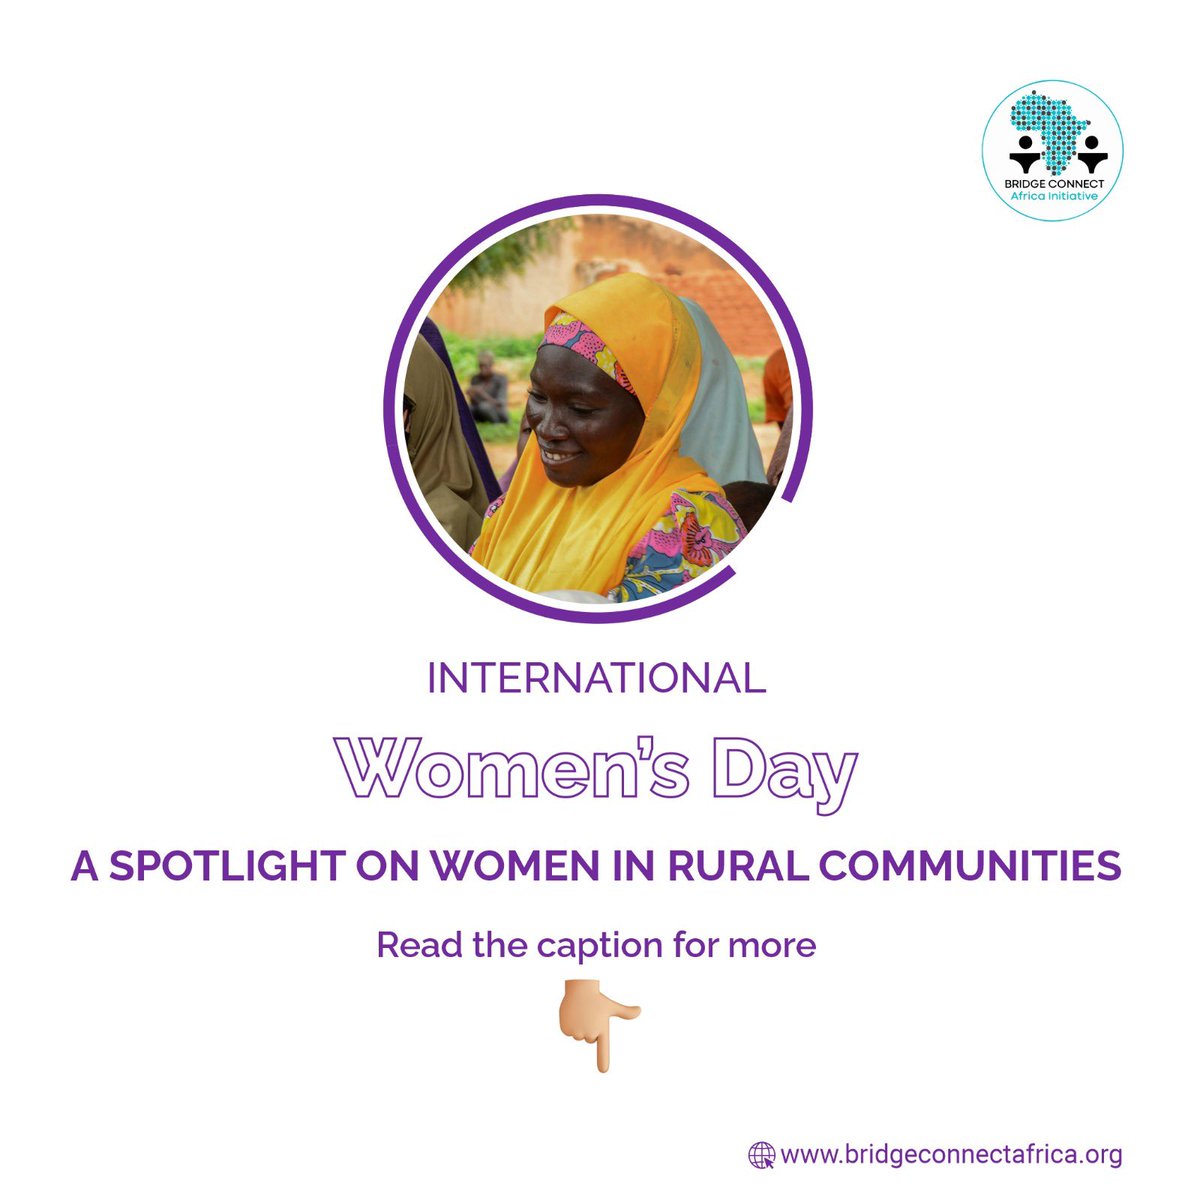 It’s International Women’s Day Today 💃🏼. Let’s shine a spotlight on all women and girls in some of the communities we have worked with. We visited a small community in Kano state some years ago, and we discovered that the community did not have a functional healthcare center.